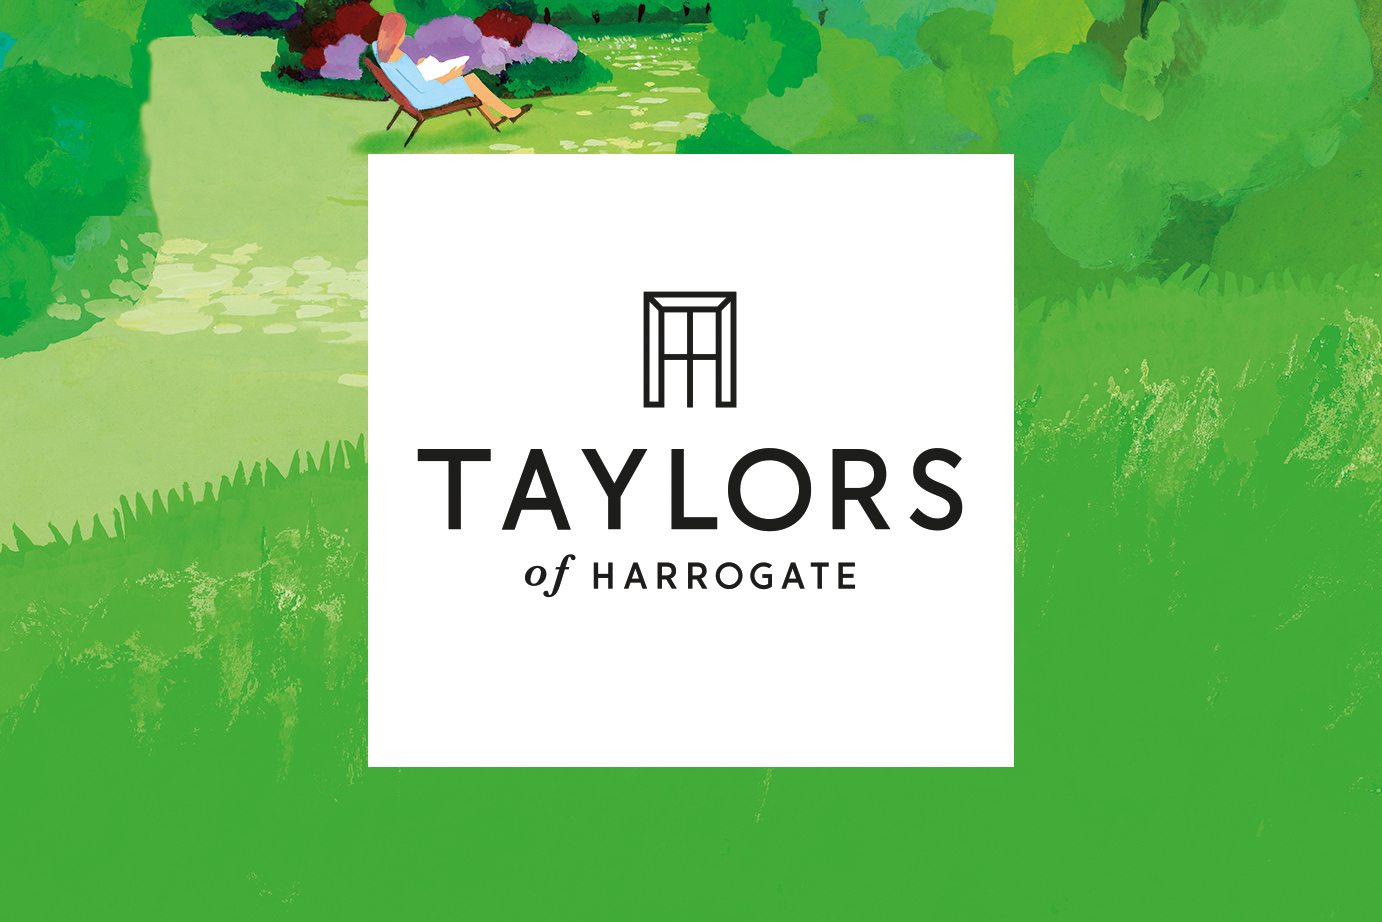 Pearlfisher Focuses on Taylors' Extraordinary Flavour